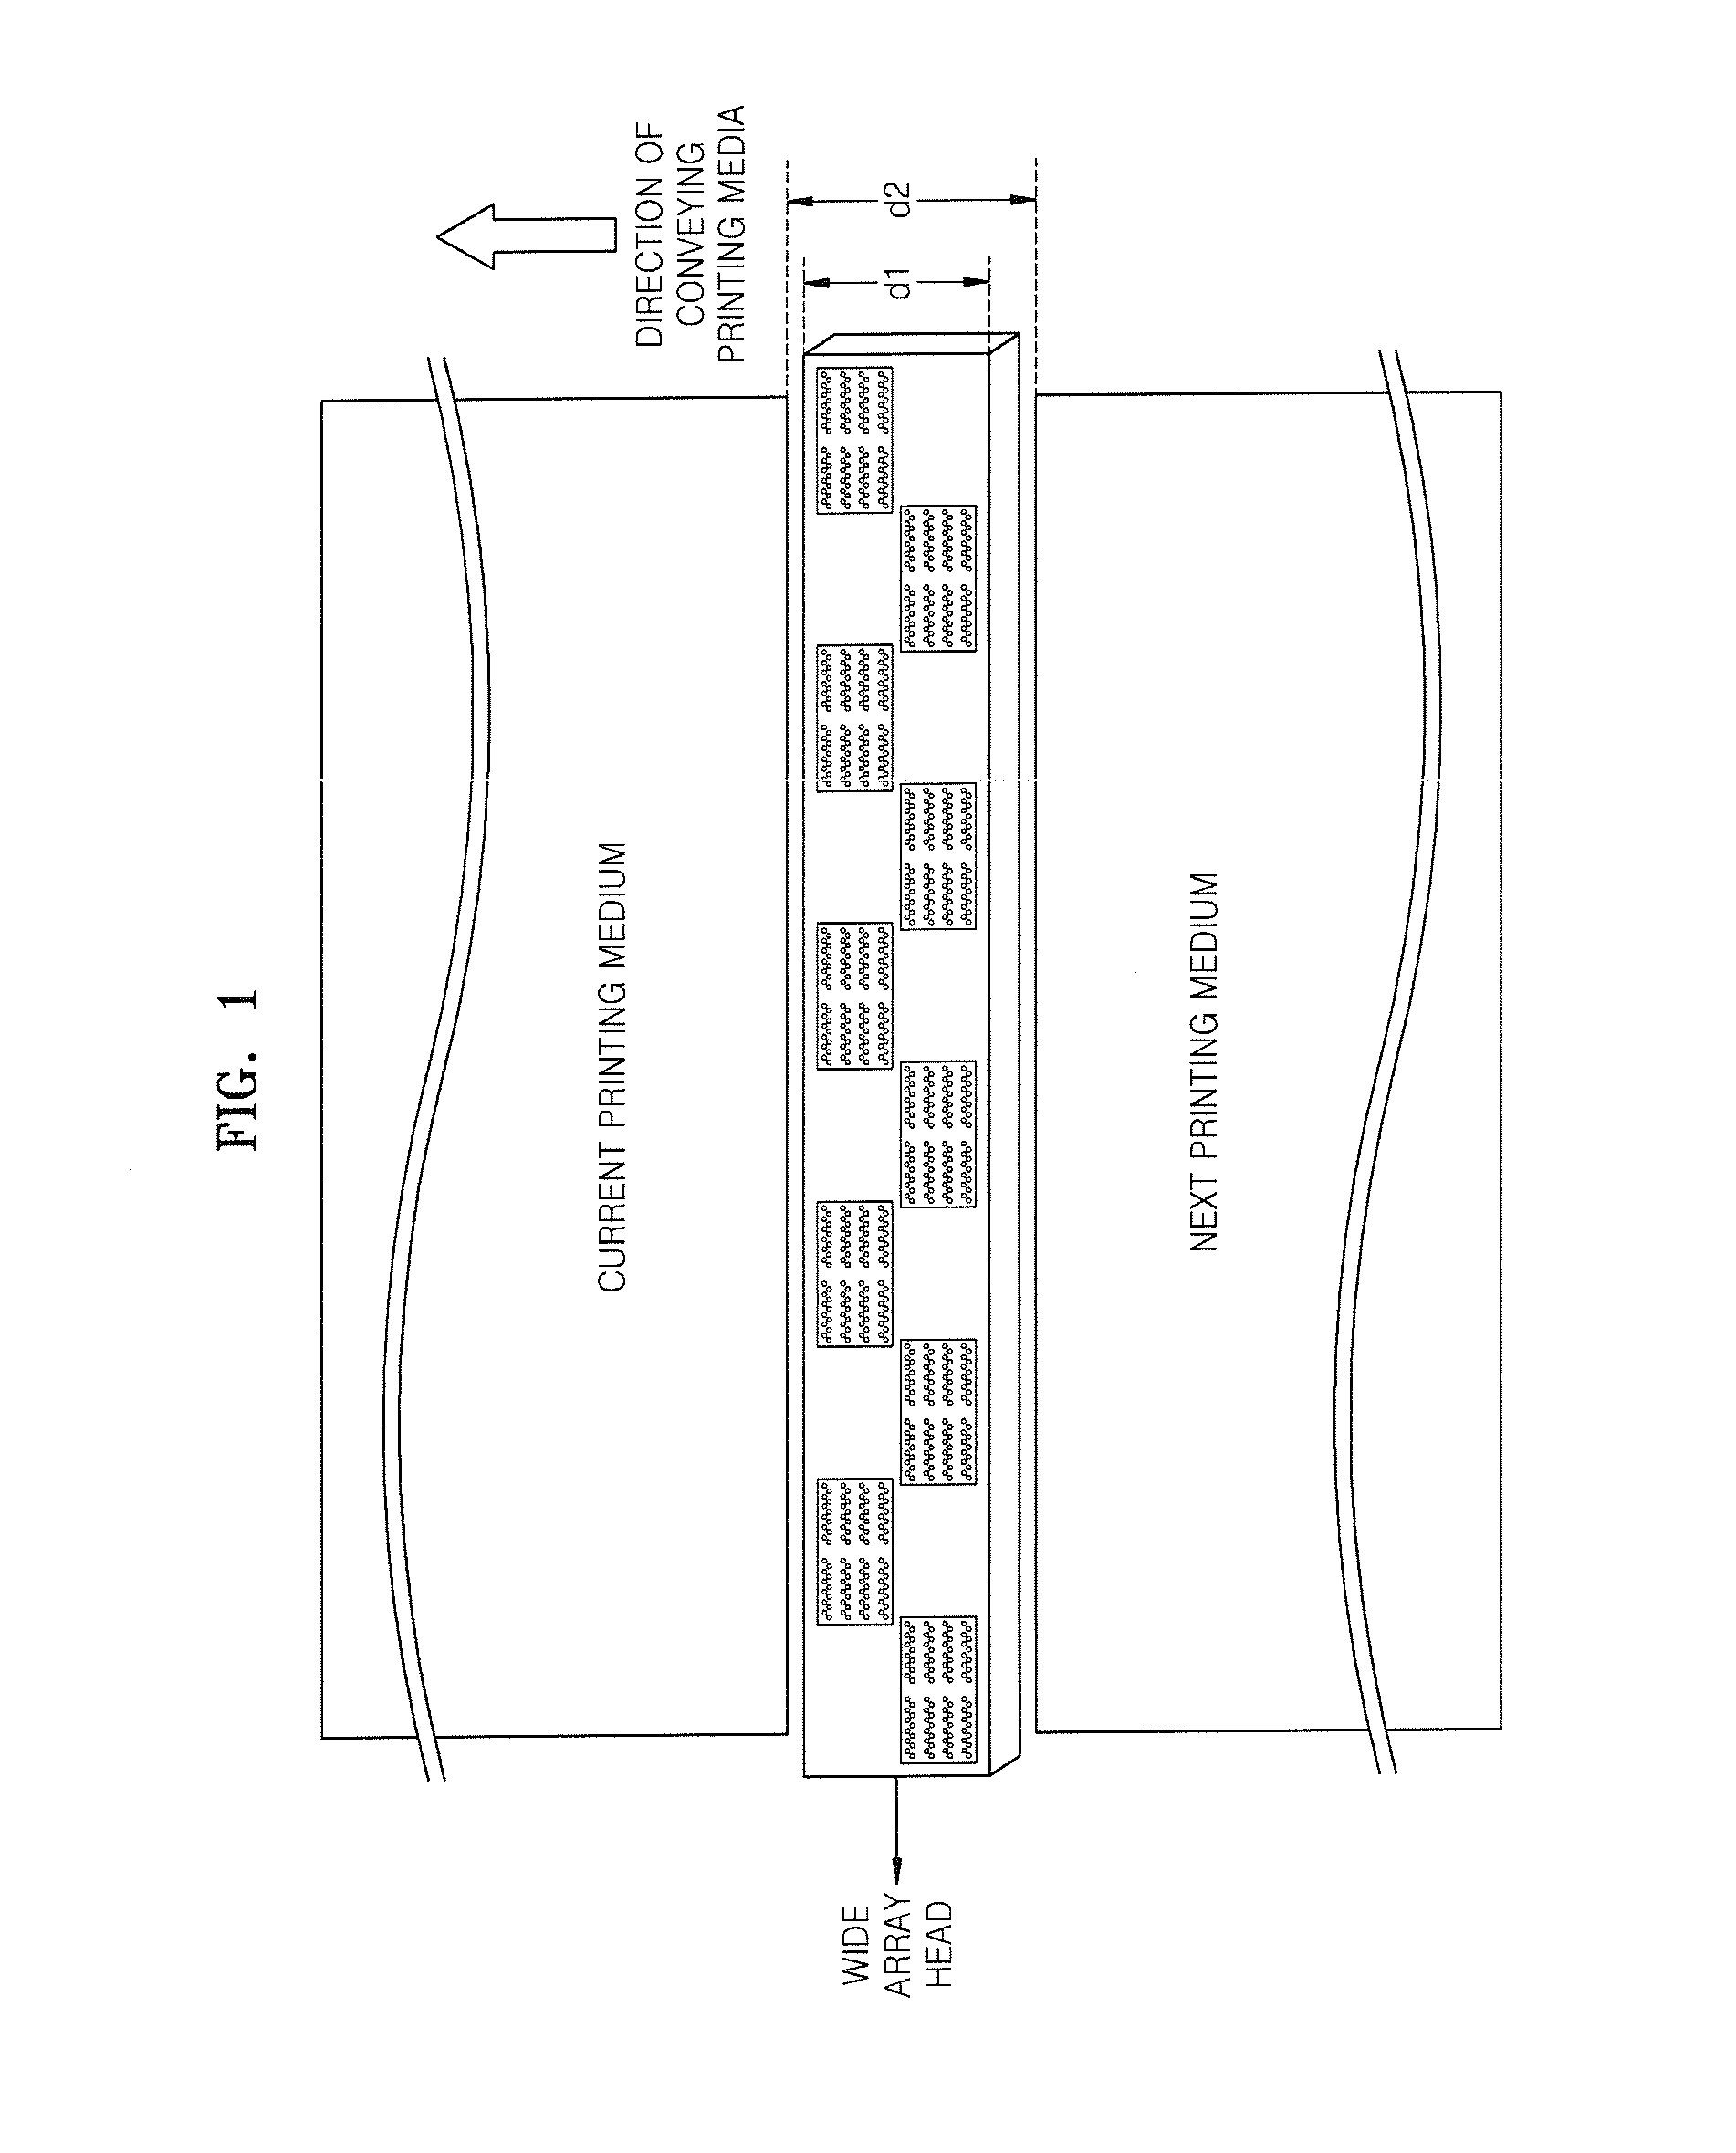 Inkjet printer having wide array head and image forming method therefor